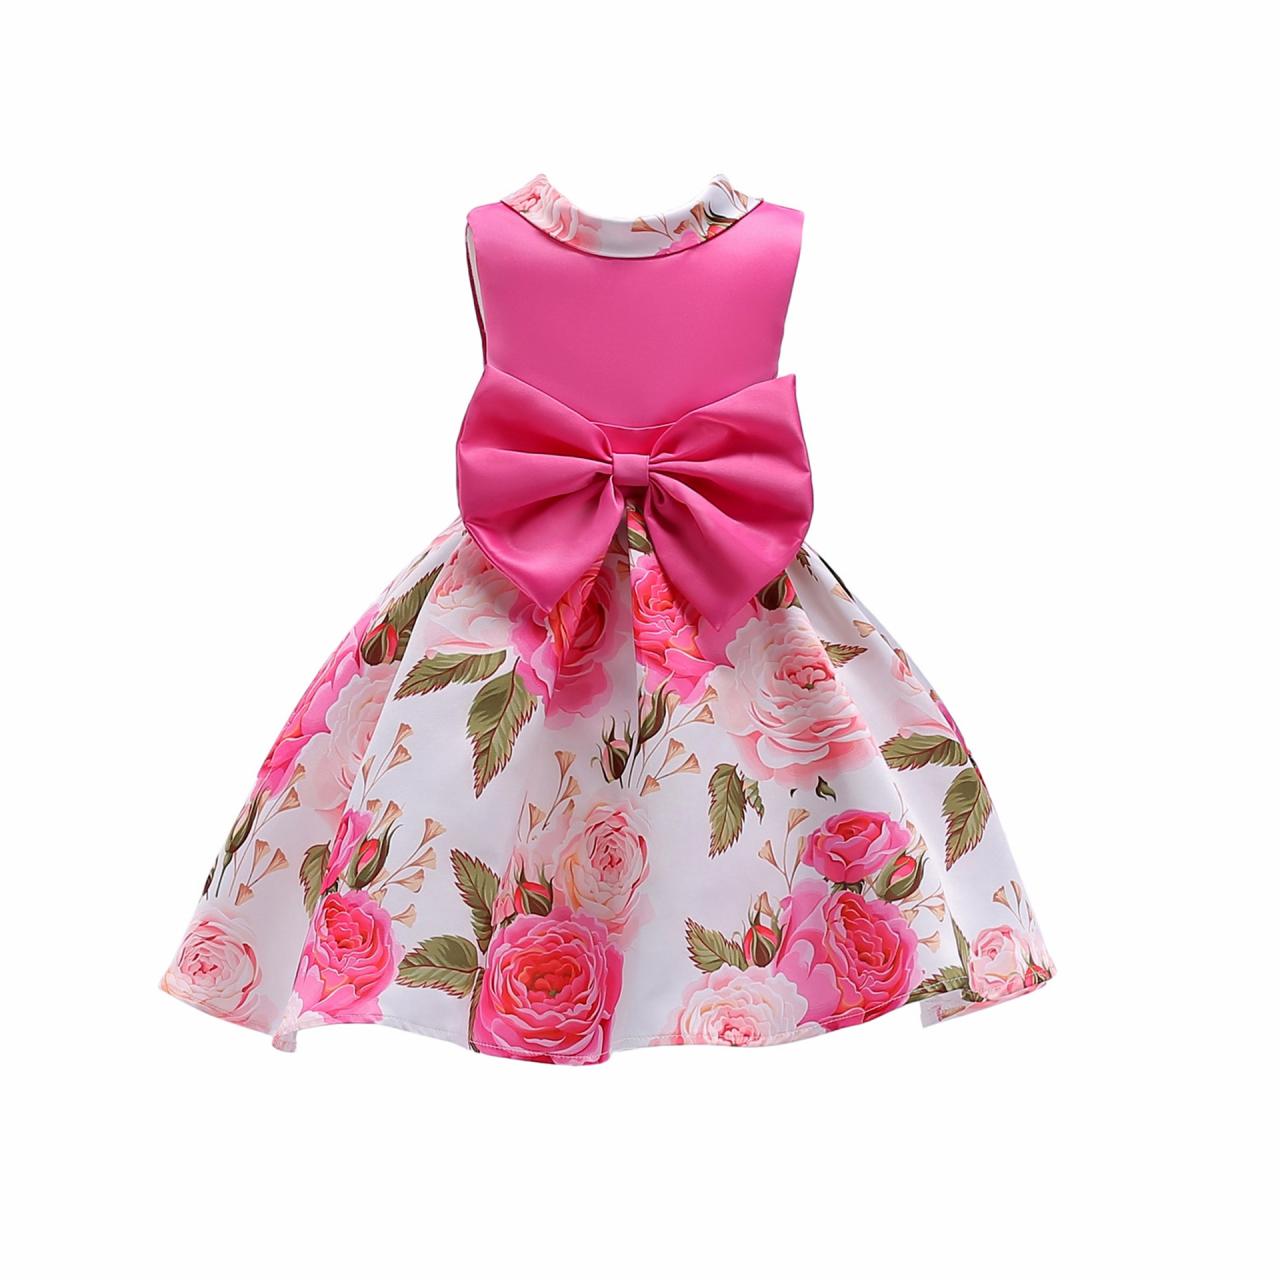 Rose Floral Flower Girl Dresses For Weddings And Party With Bow